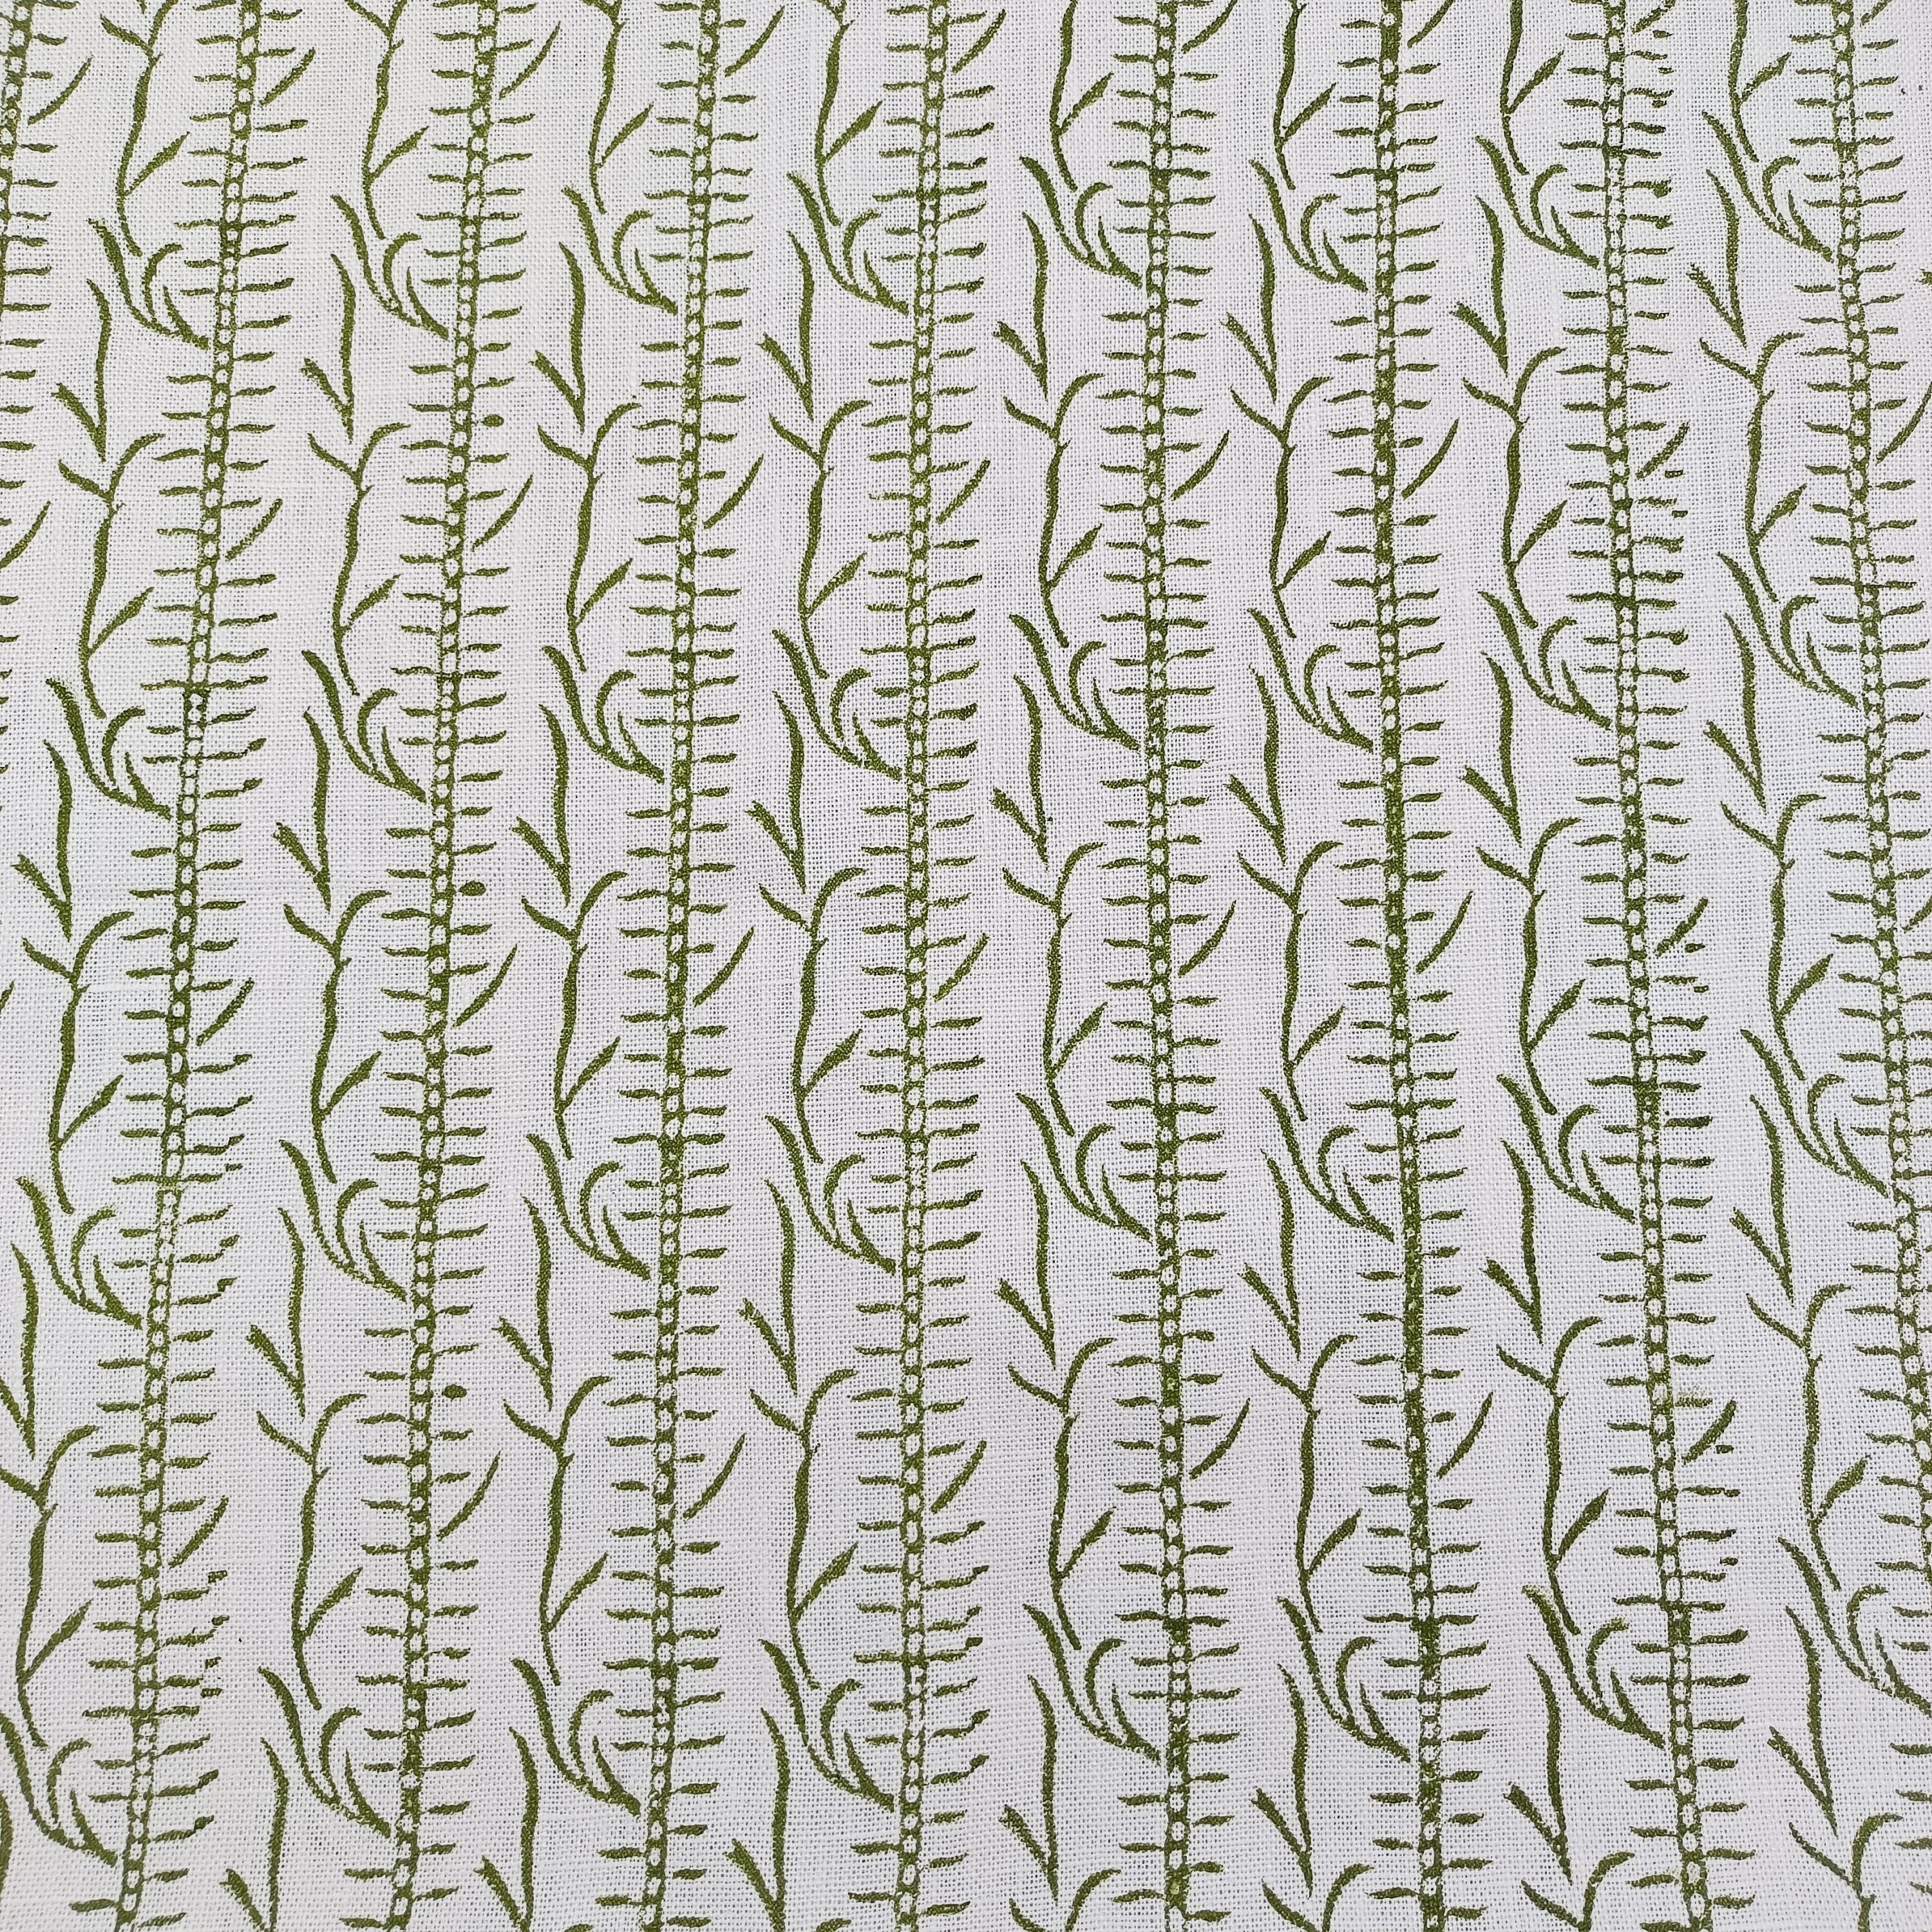 Block Print Linen Fabric, Sugarcane  Natural Off White Linen Fabric  Handmade Block Print Linen  Home Decor Upholestery Fabric By The Yard